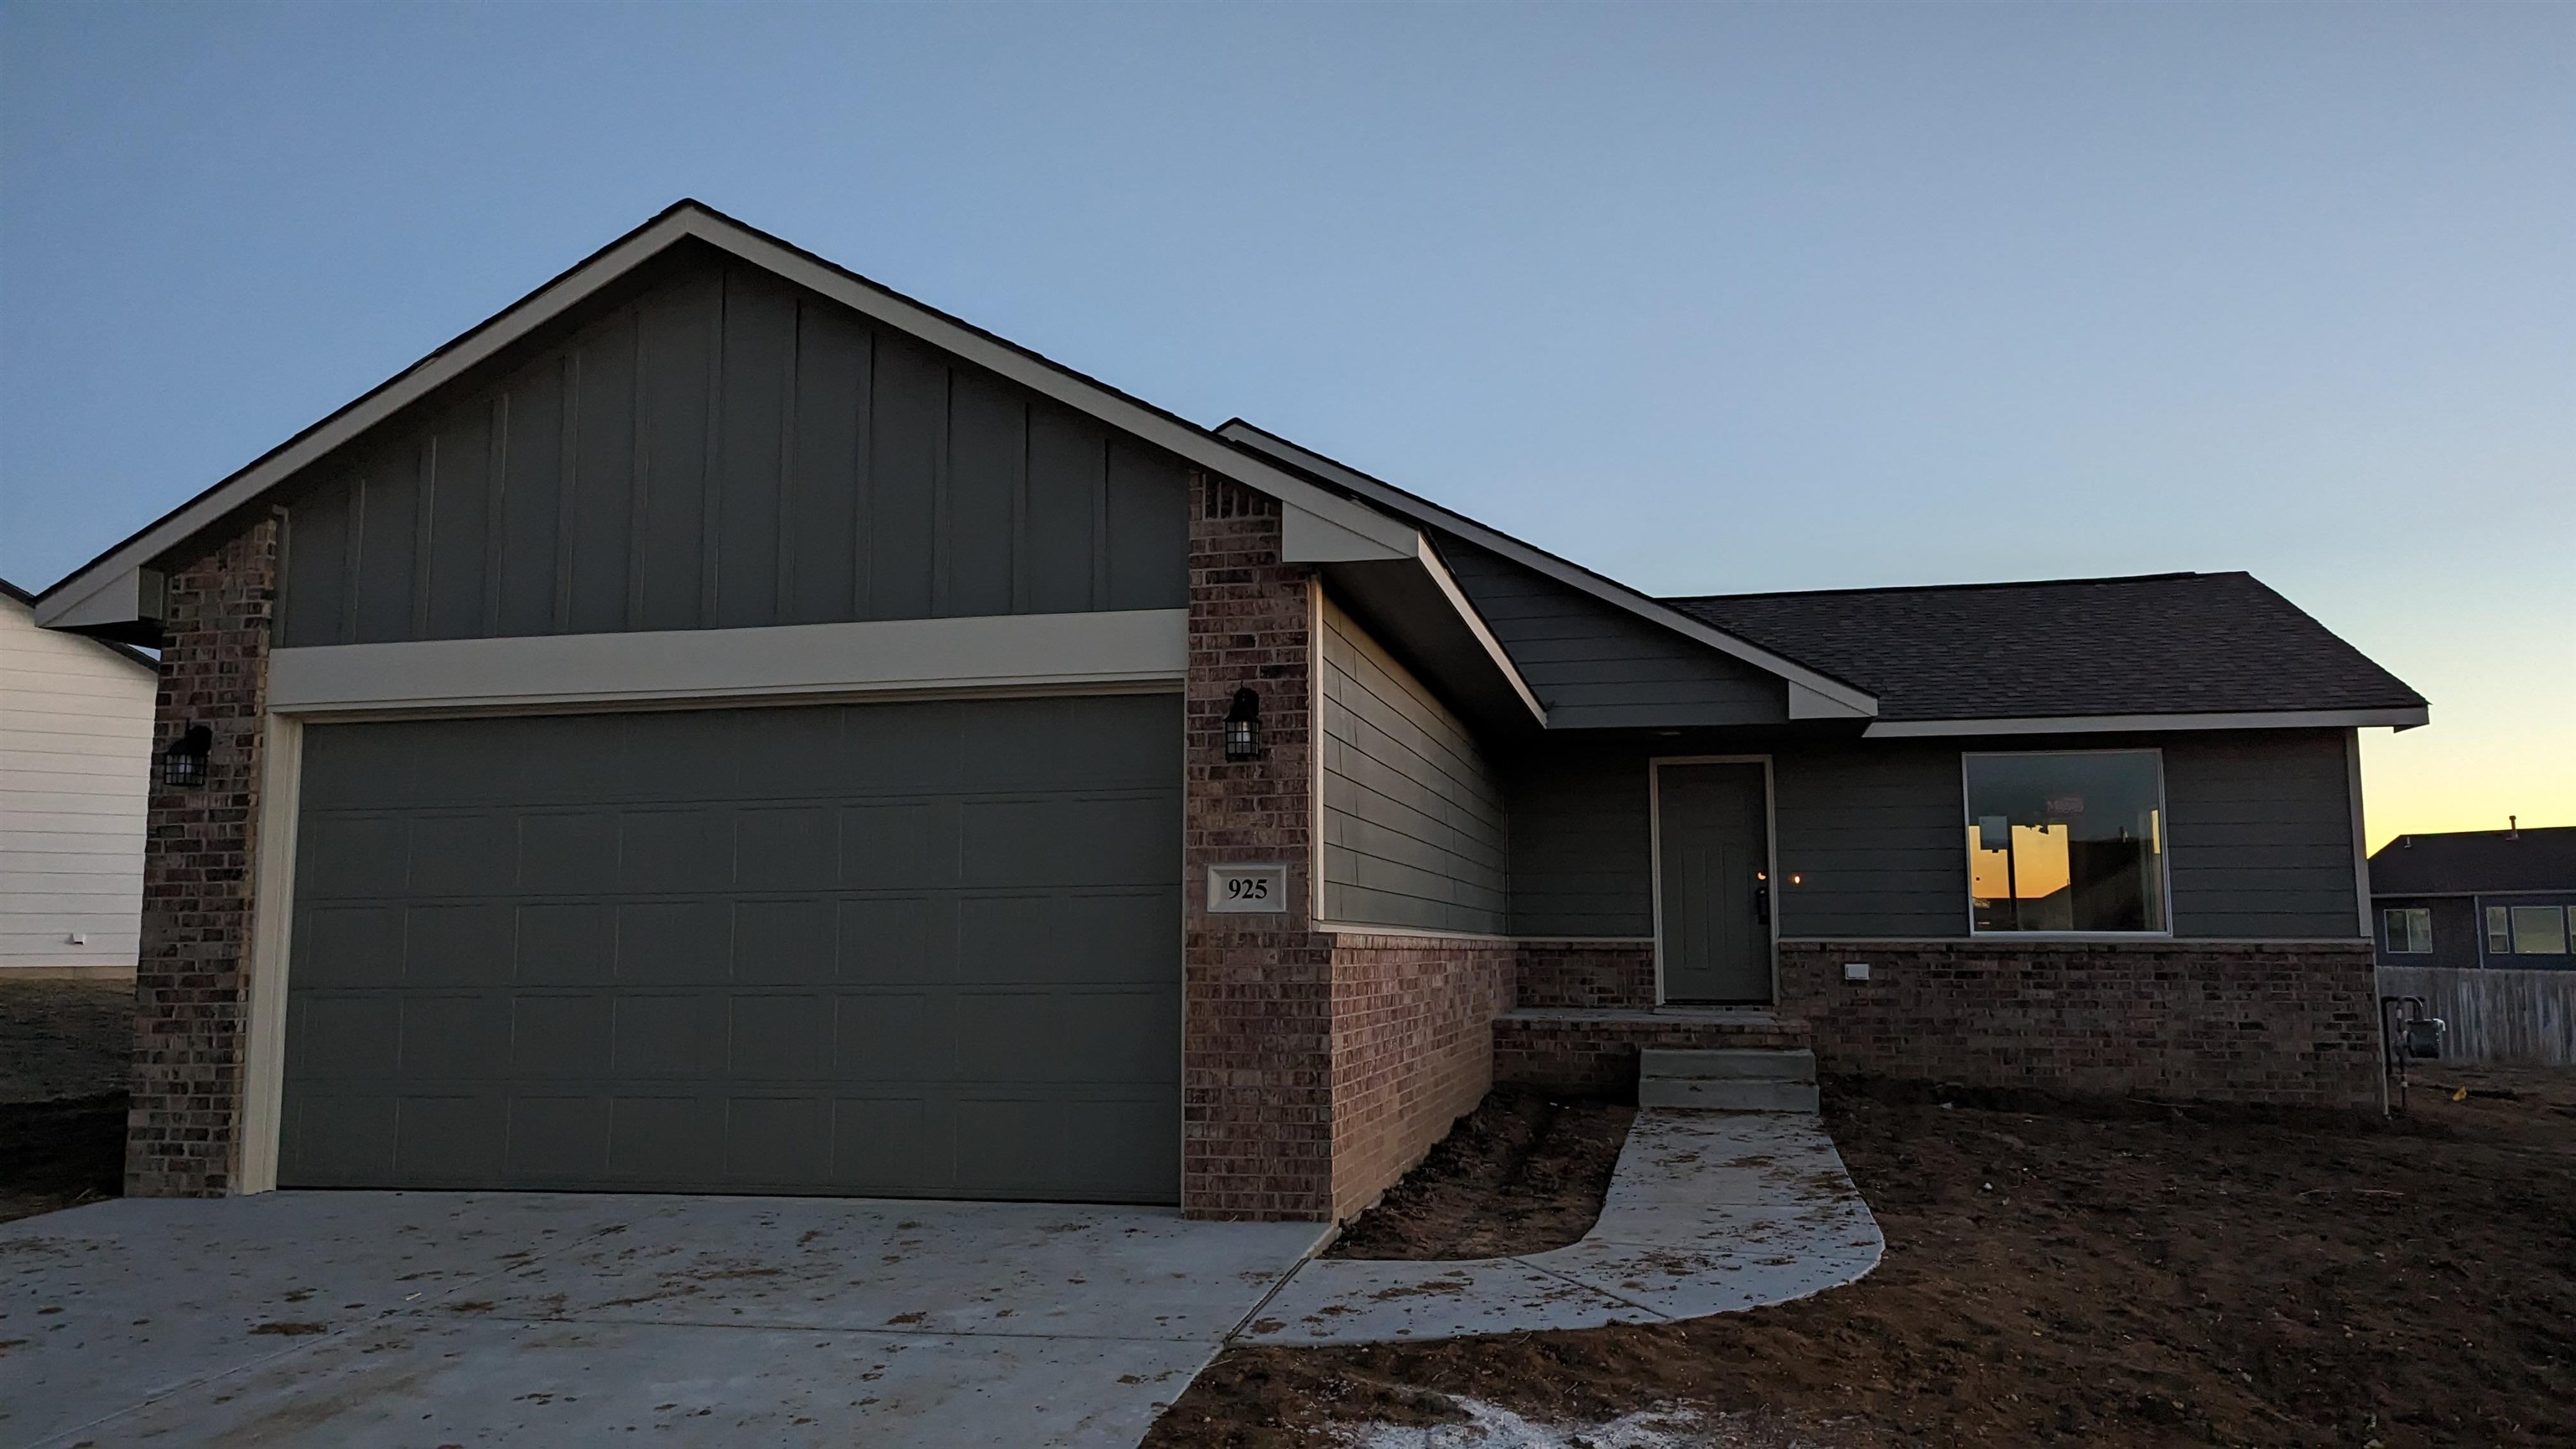 Don Klausmeyer classic and dependable Austin Plan features 2 Bedrooms and open living design on the 